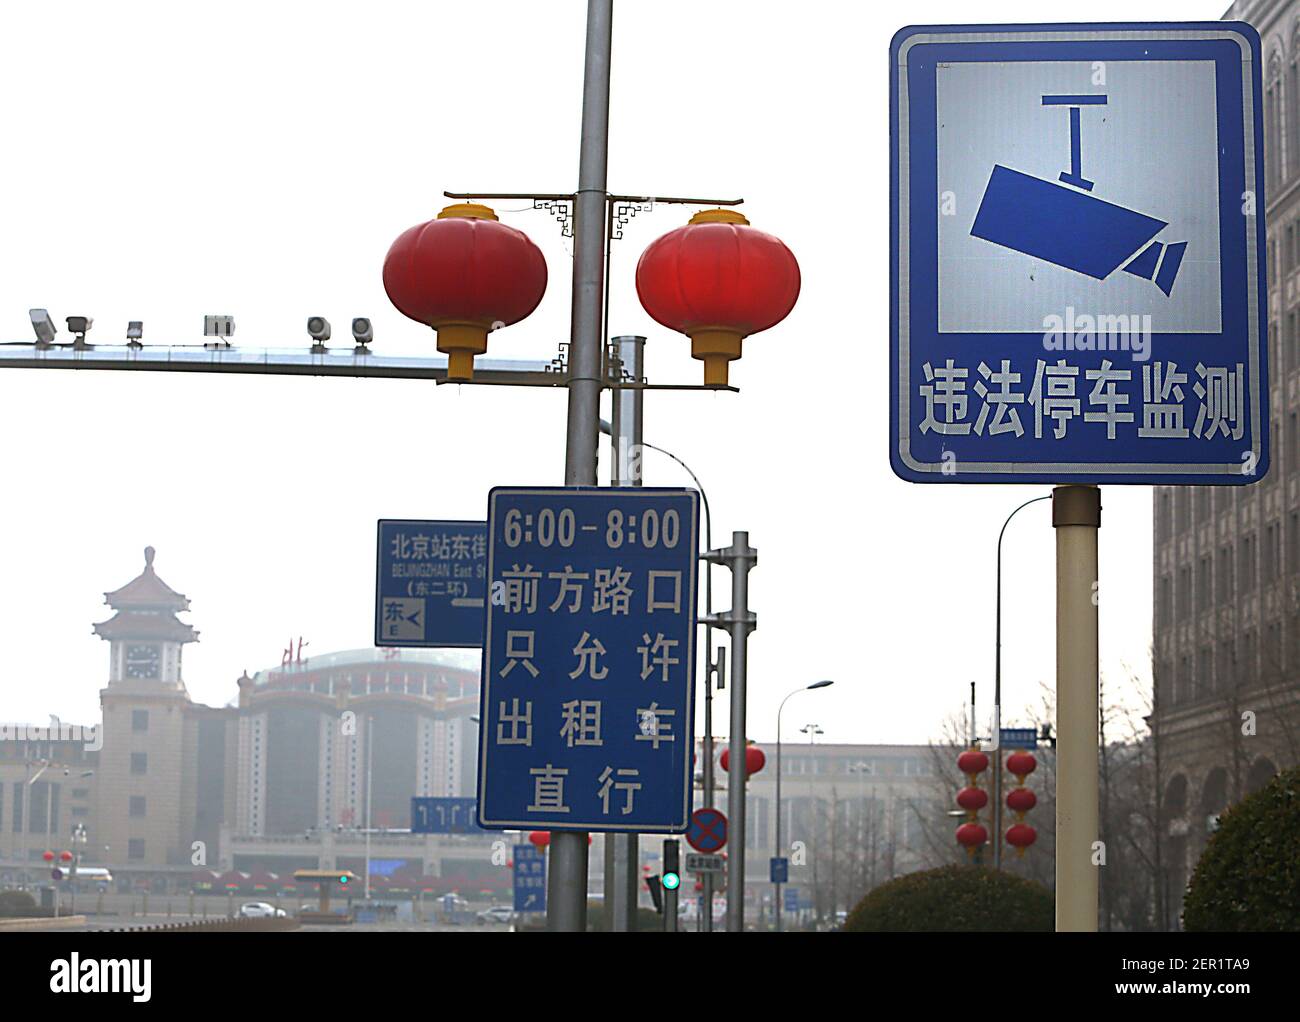 Beijing, China. 28th Feb, 2021. Closed circuit television (CCTV) cameras  watch over an intersection in downtown Beijing on Sunday, February 28,  2021. Chinese scientists have developed a 500 megapixel facial recognition  camera